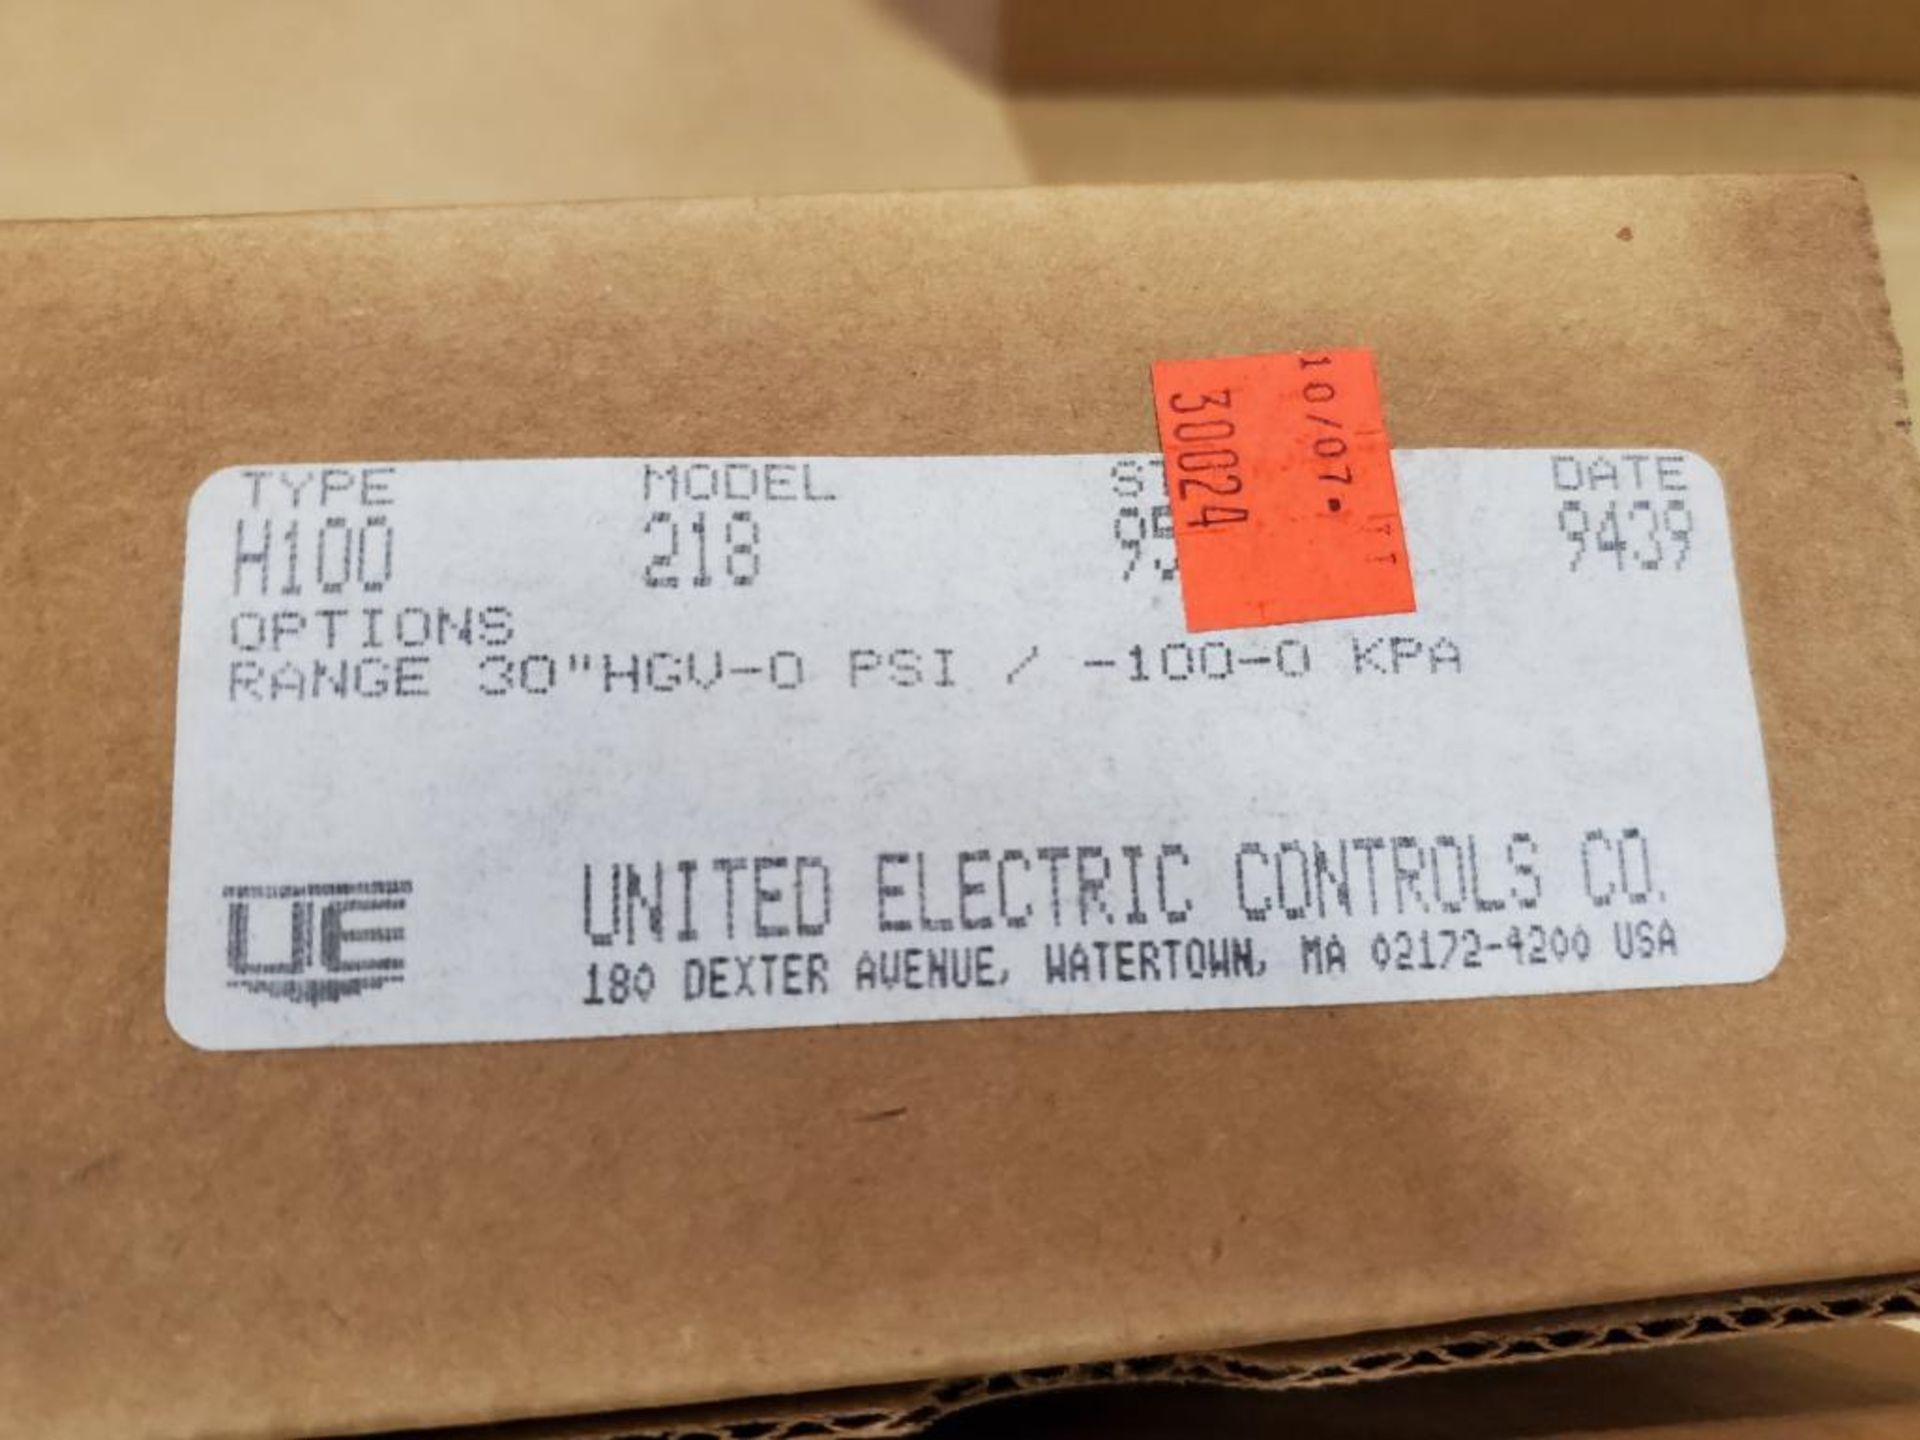 Qty 5 - United Electric controls H100 Model 218 gage. 30" HGV-0 PSI / -100-0 KPA. New in box. - Image 3 of 4